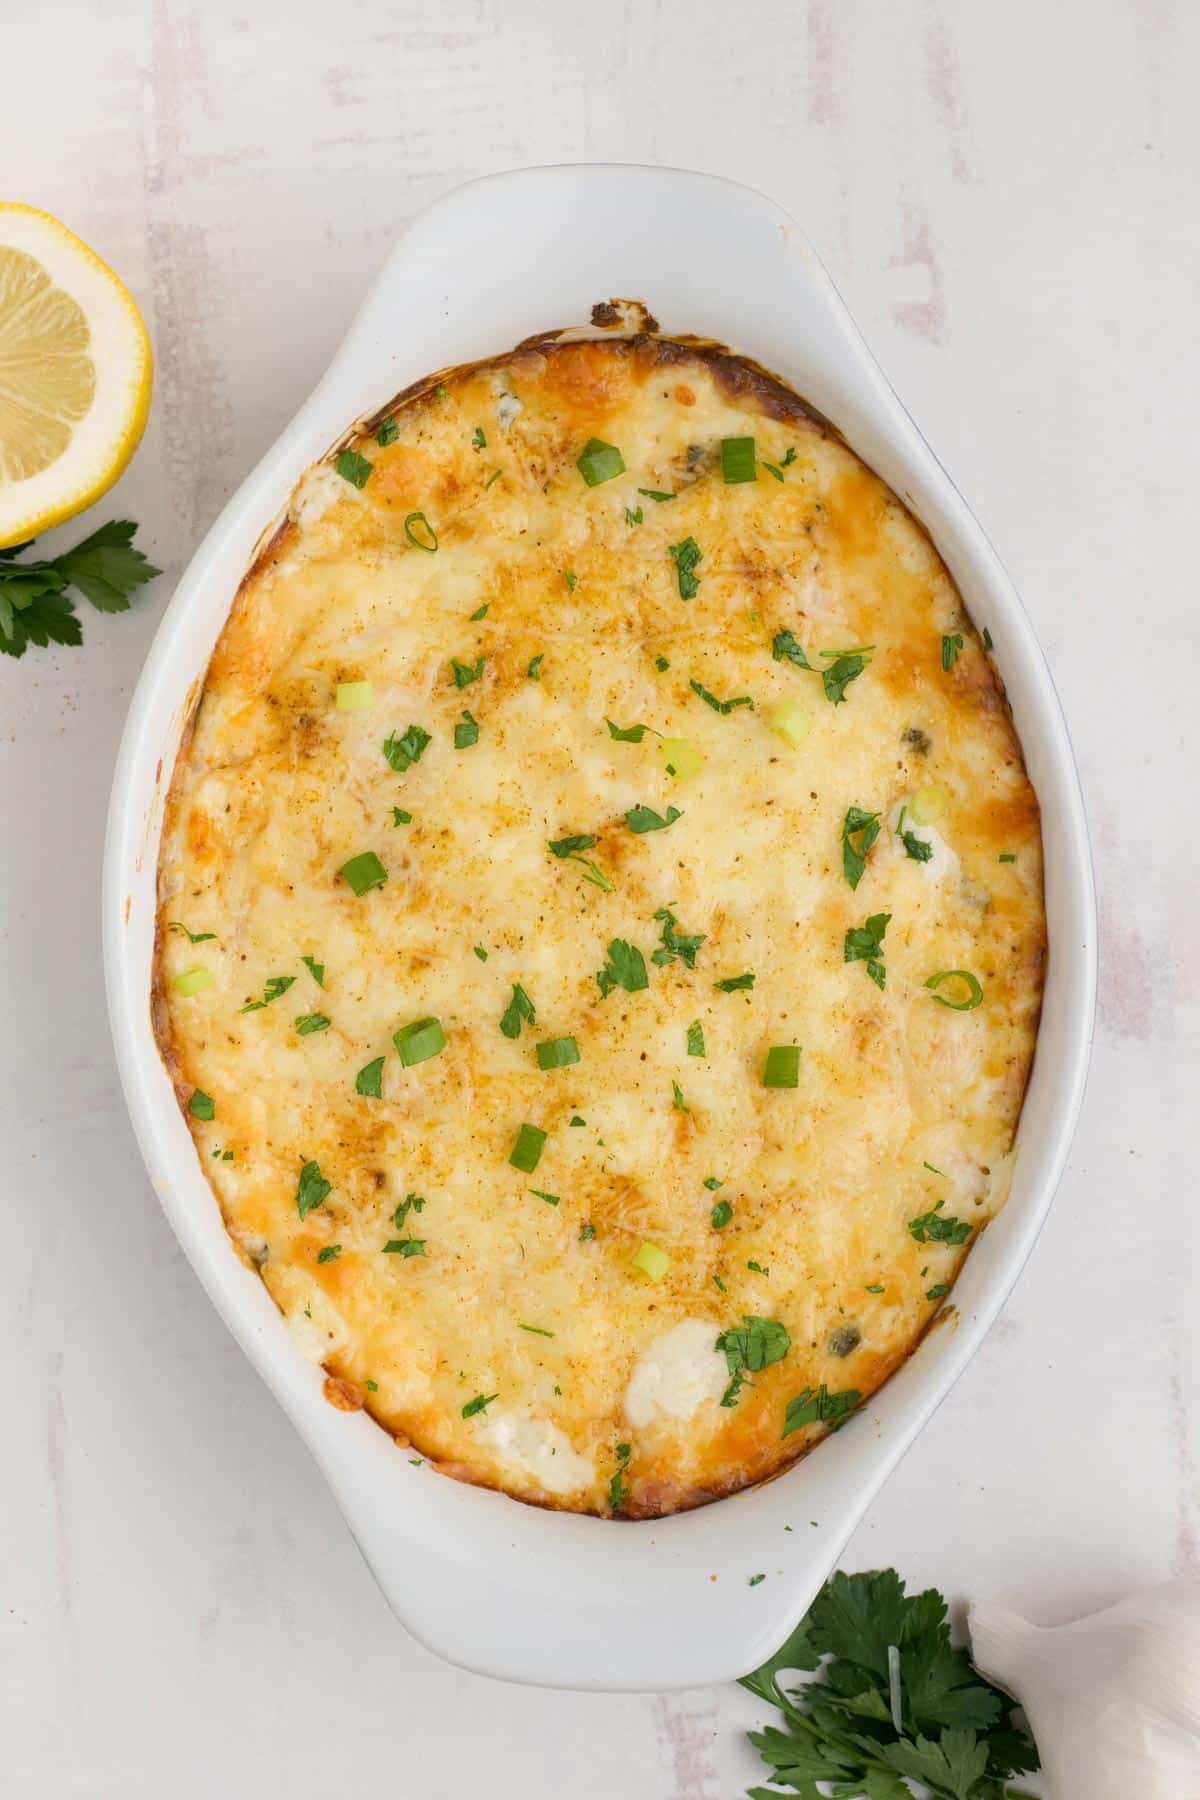 Hot shrimp dip in casserole dish after baking is sprinkled with some parsley.